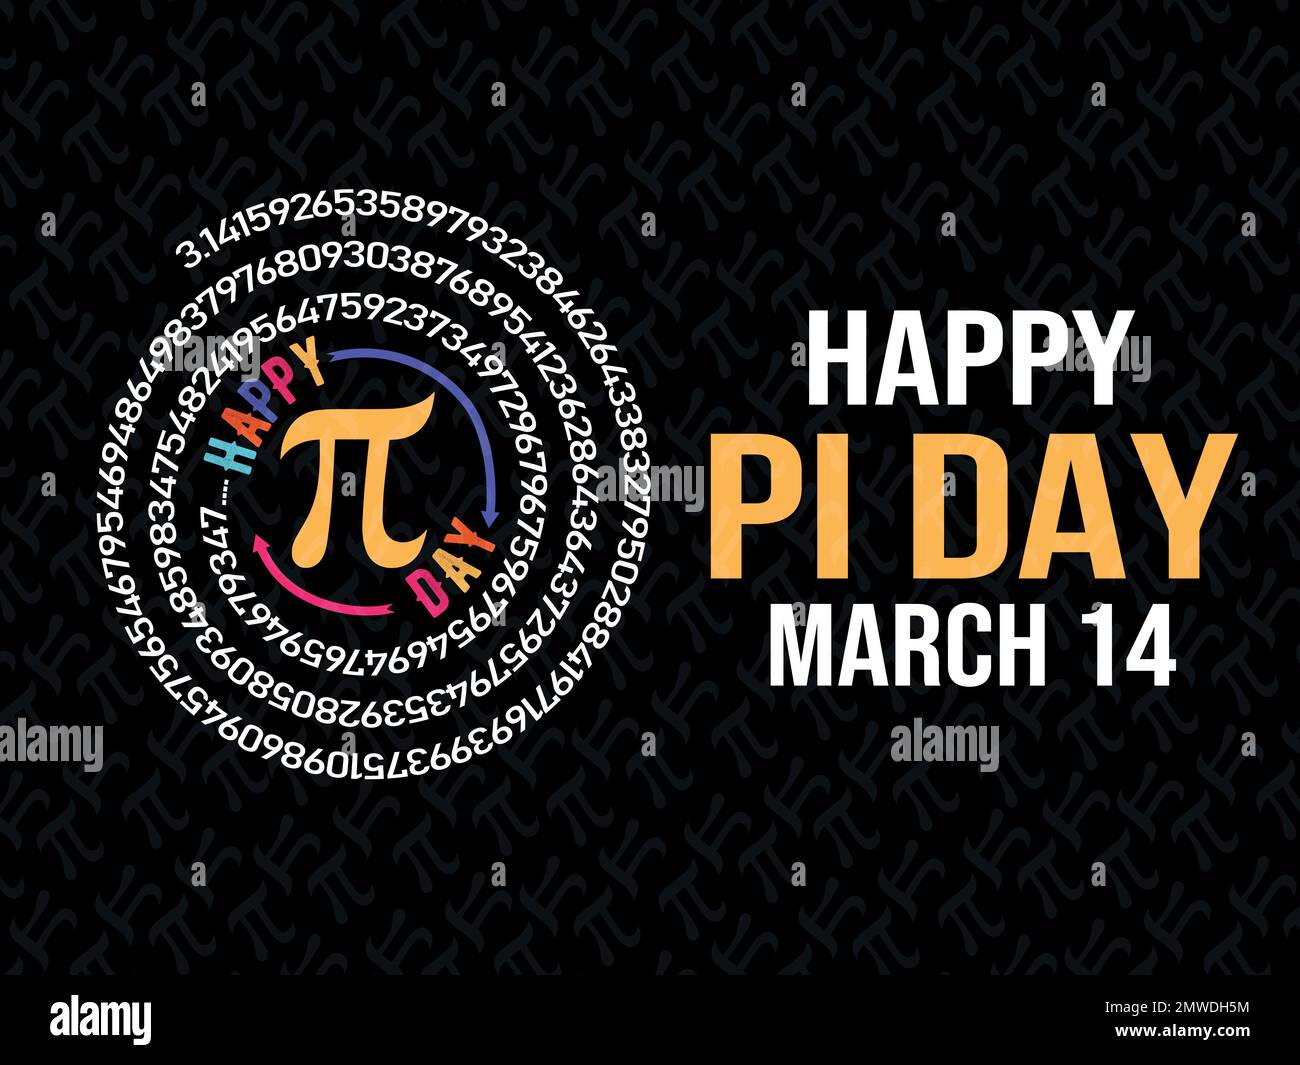 Happy international  pi day march 14 template design vector Stock Vector